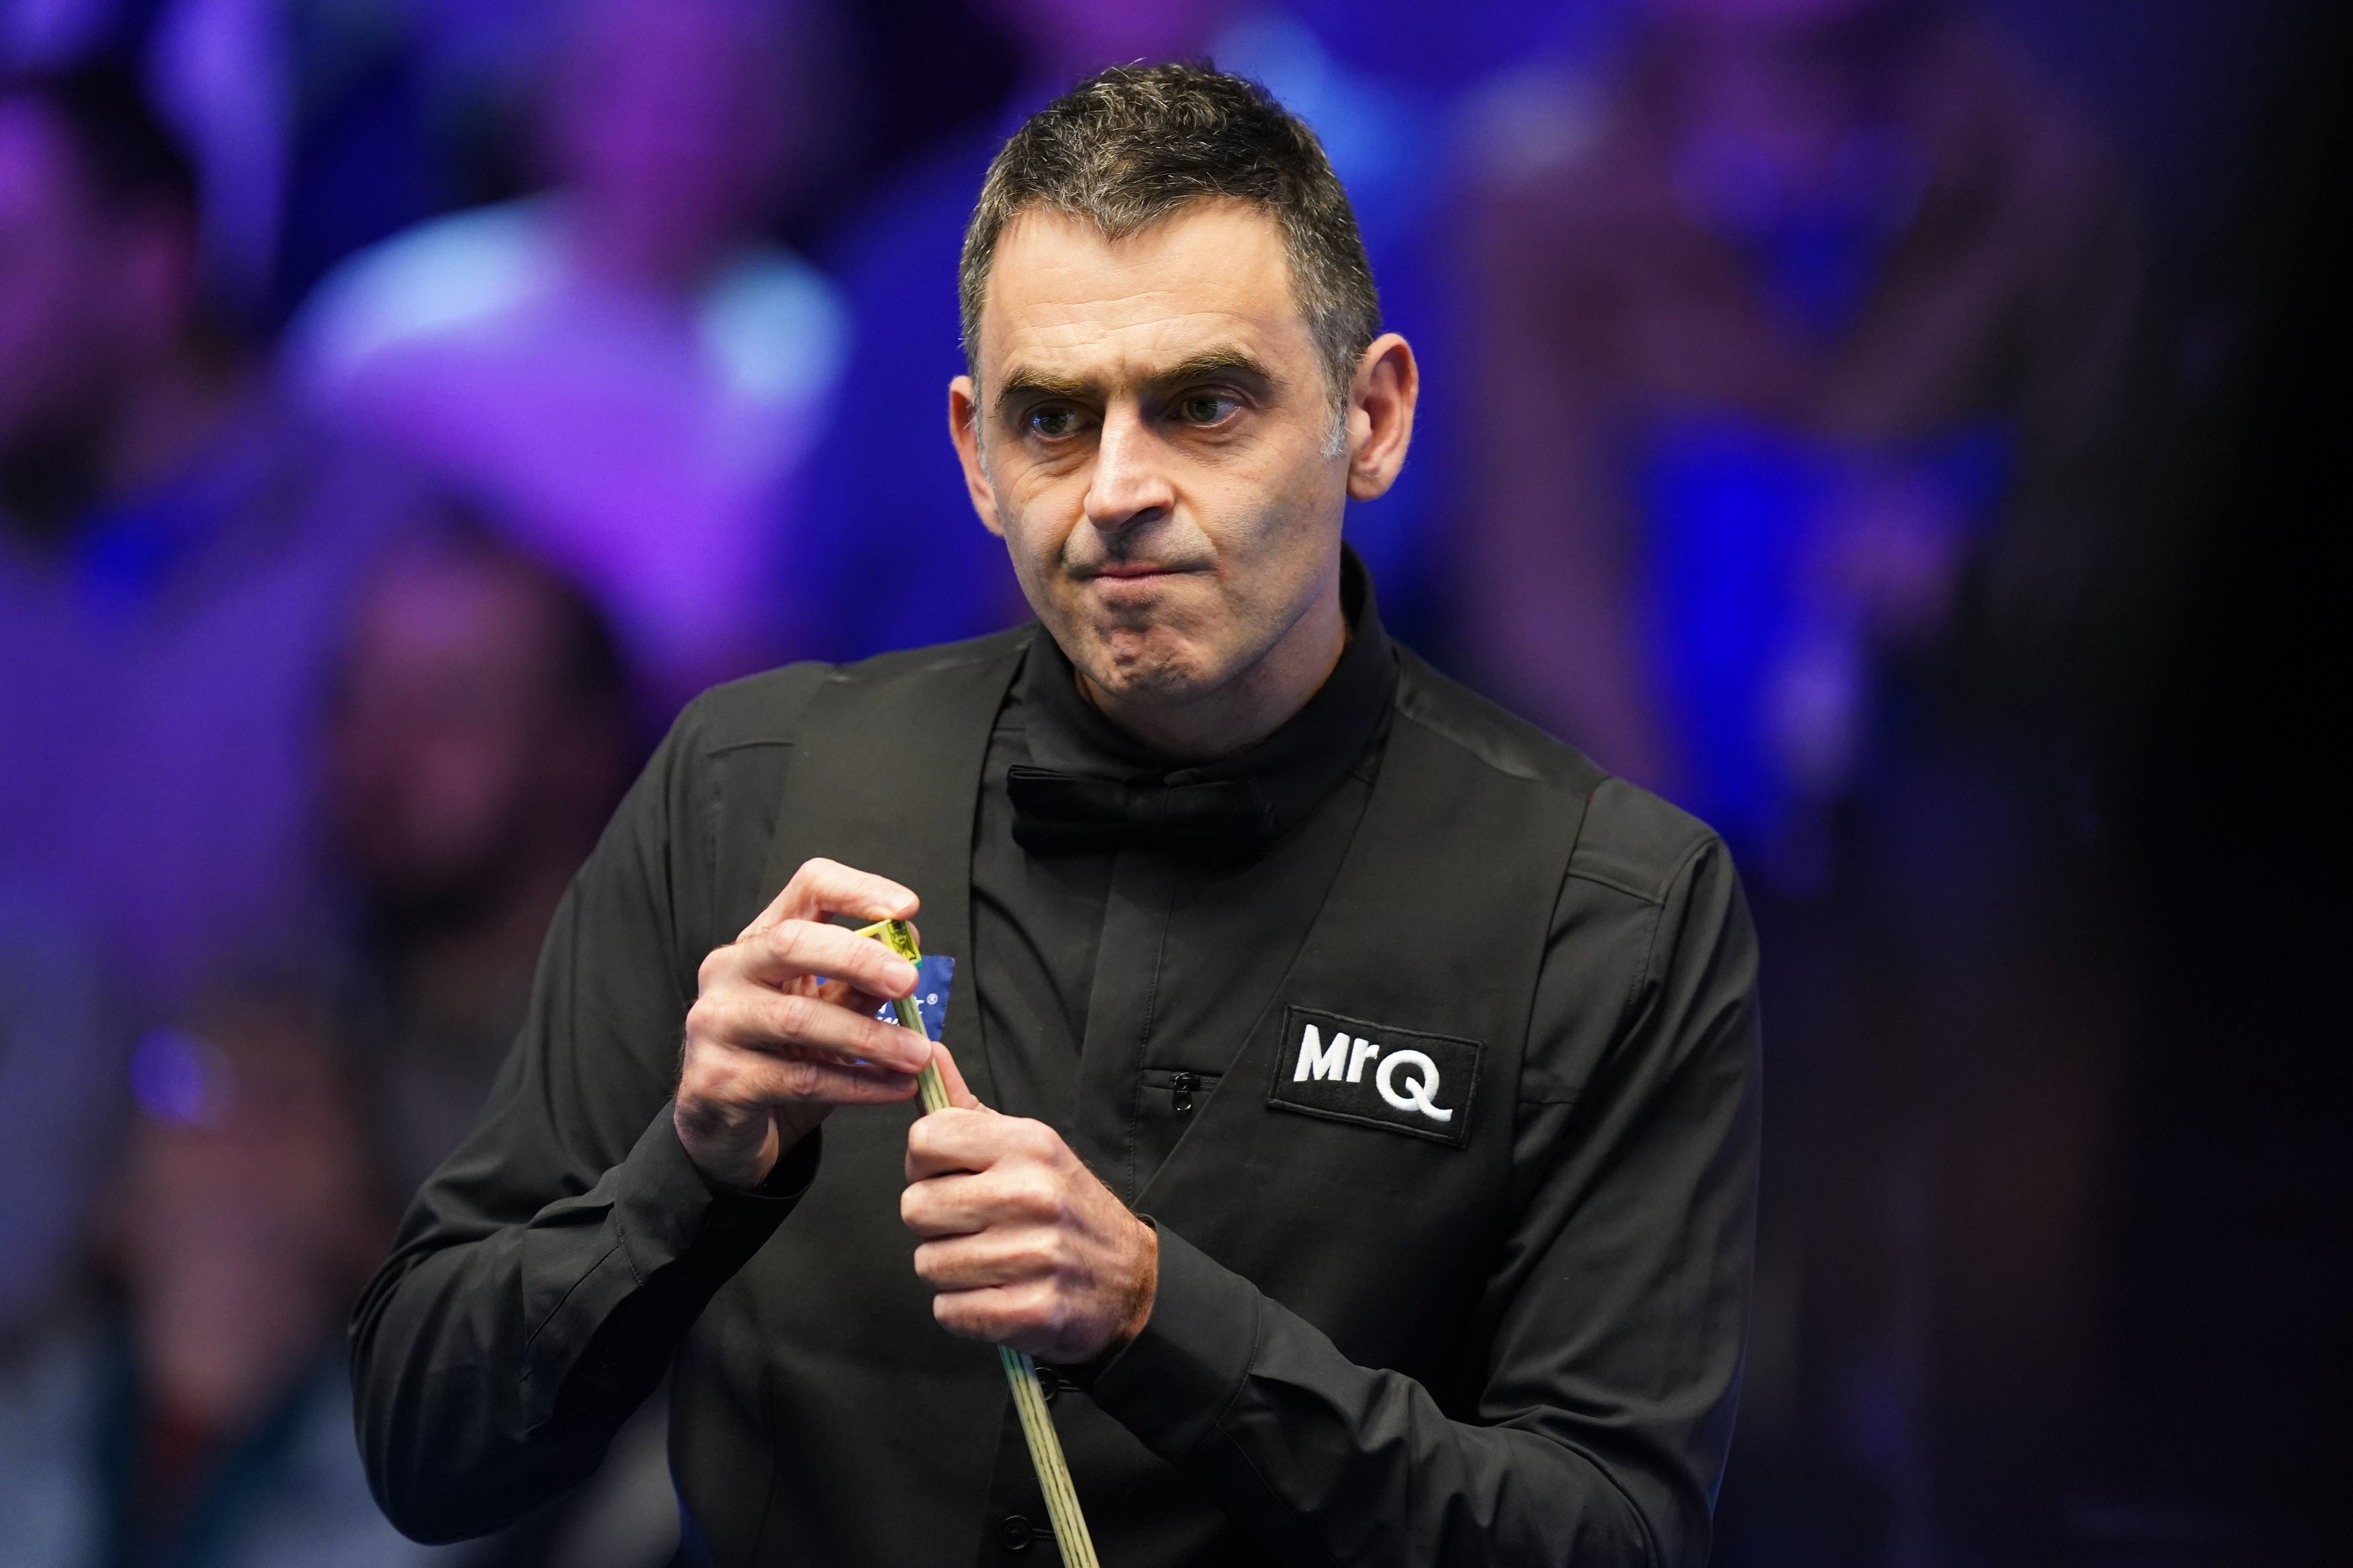 Ronnie O’Sullivan admitted he doesn’t care about the tournament